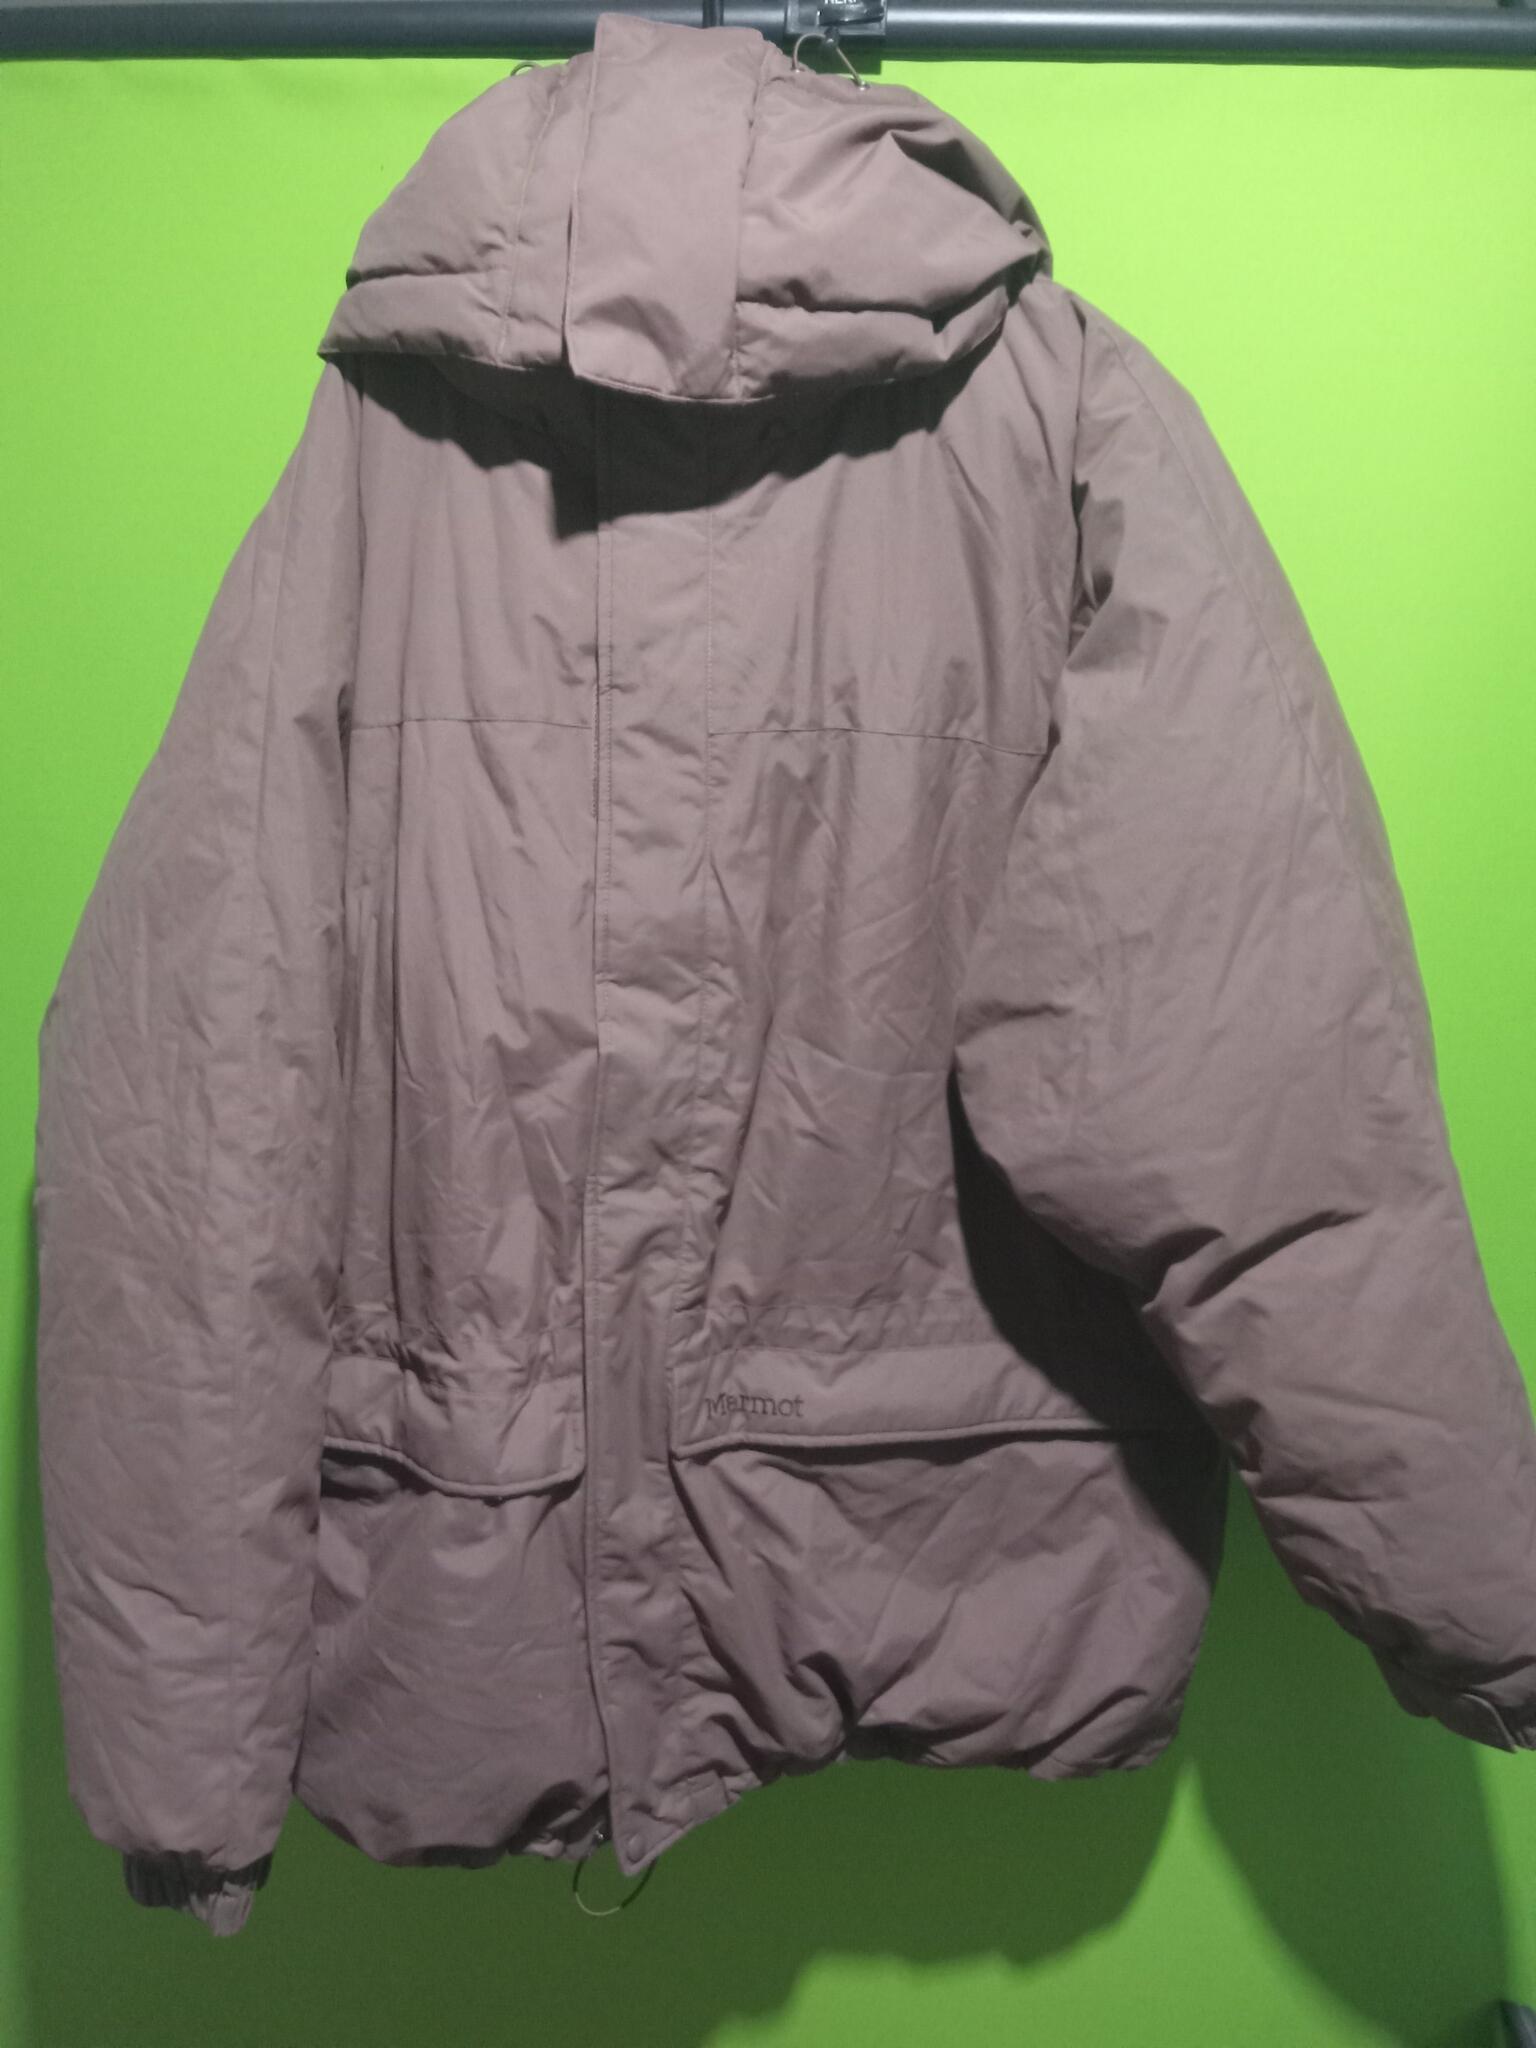 MARMOT 3XL FOR SELL $200 CASH PICK UP ONLY - Baisley Park (116Ave-Sutphin)